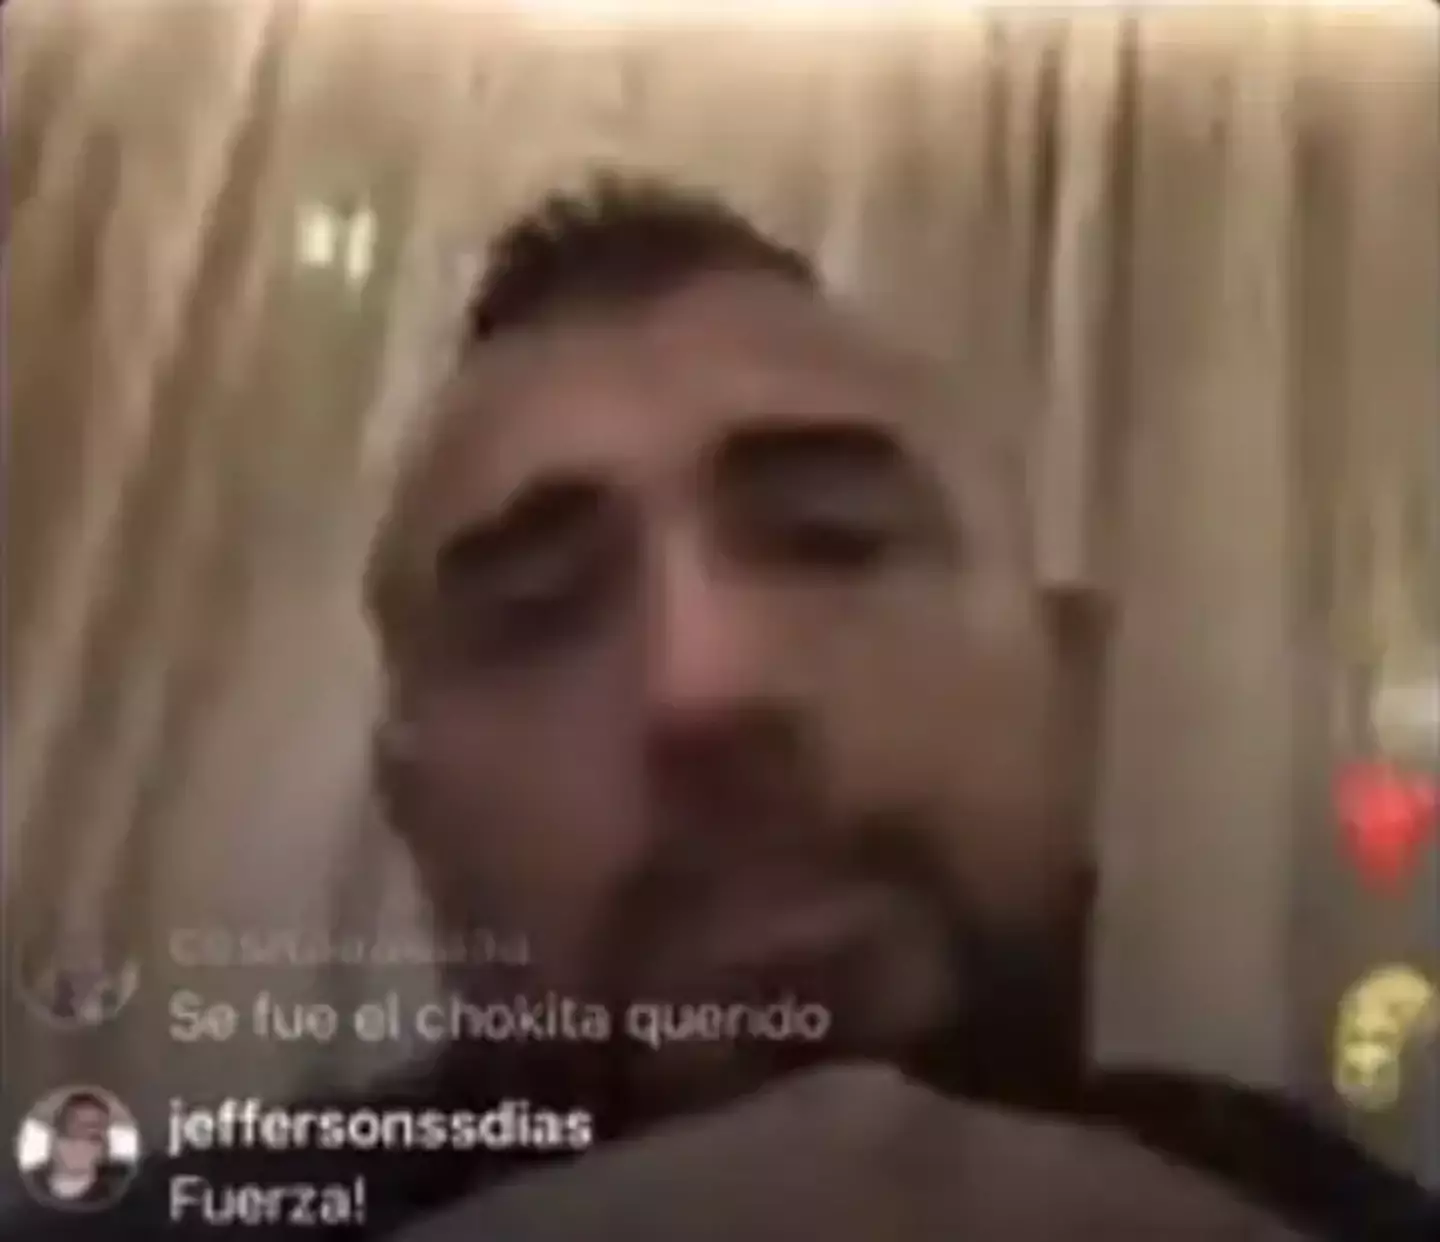 Vidal tuned into the funeral service on Instagram Live. Image: Instagram